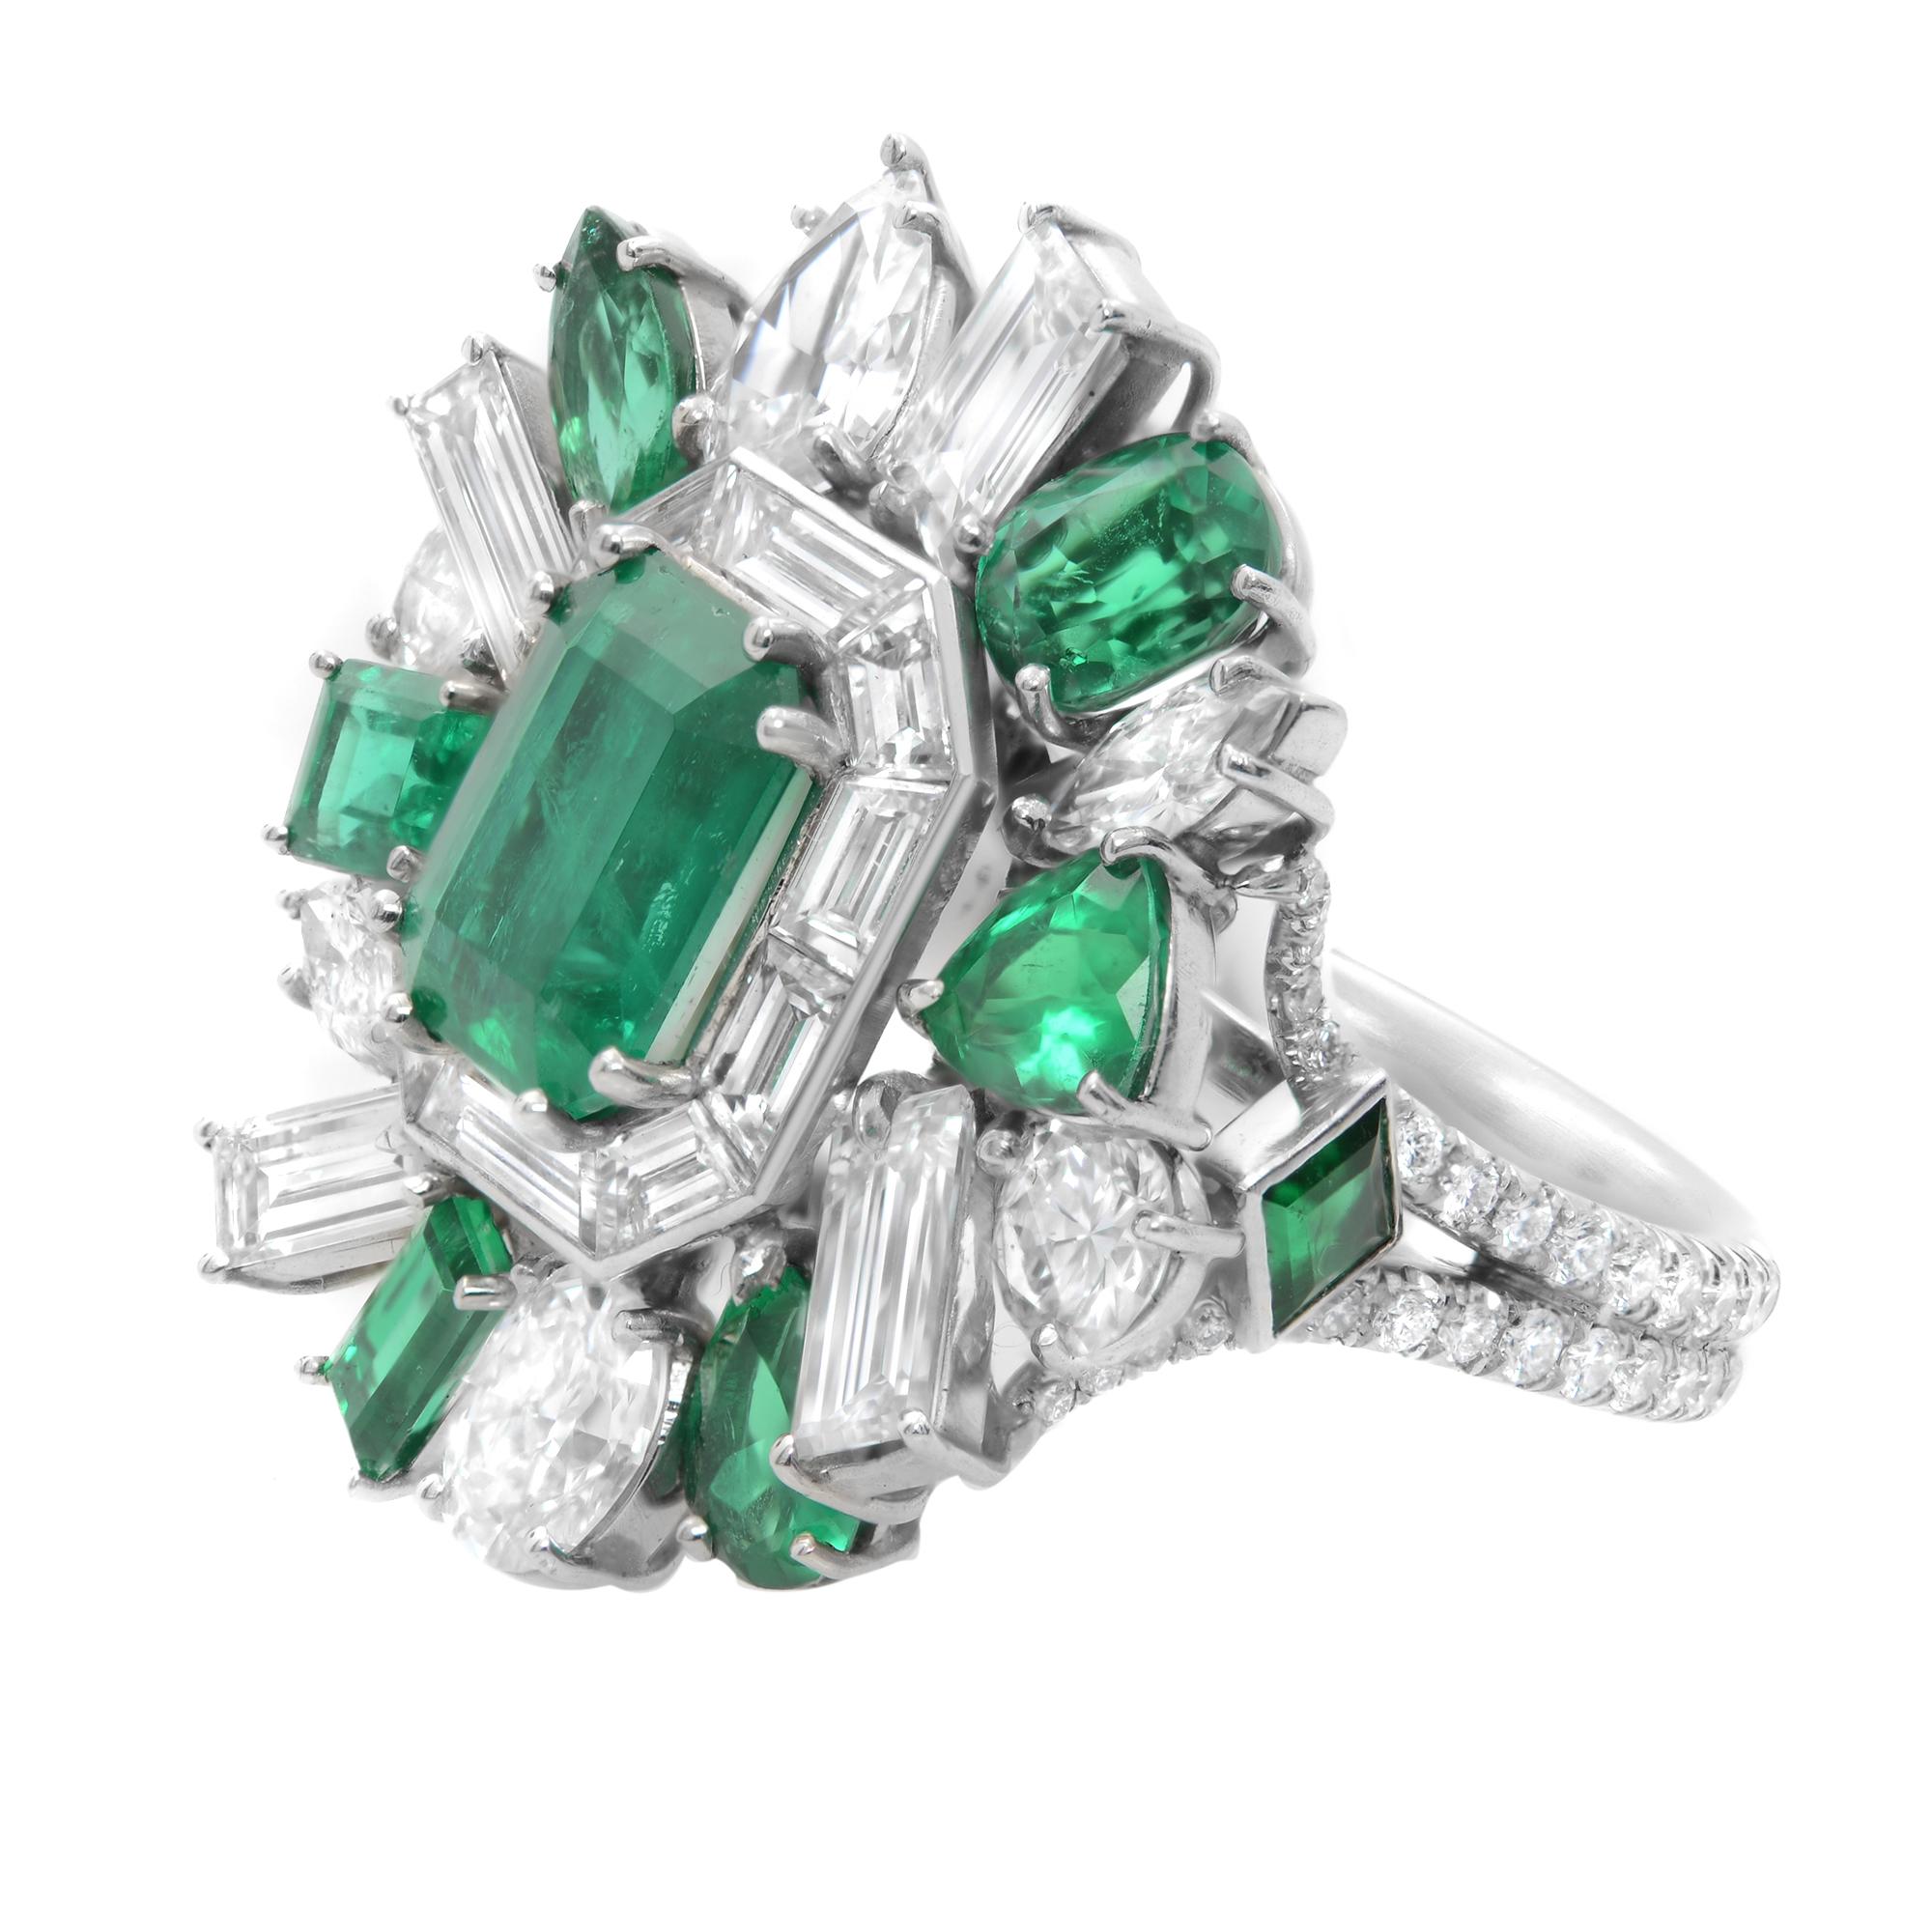 This spectacular platinum cocktail ring presents an excellent quality Green Emerald of 2.92 carats in the center. The rest of the ring is set with deep colored, different shapes emeralds and contrasted by diamonds. An entourage of further smaller